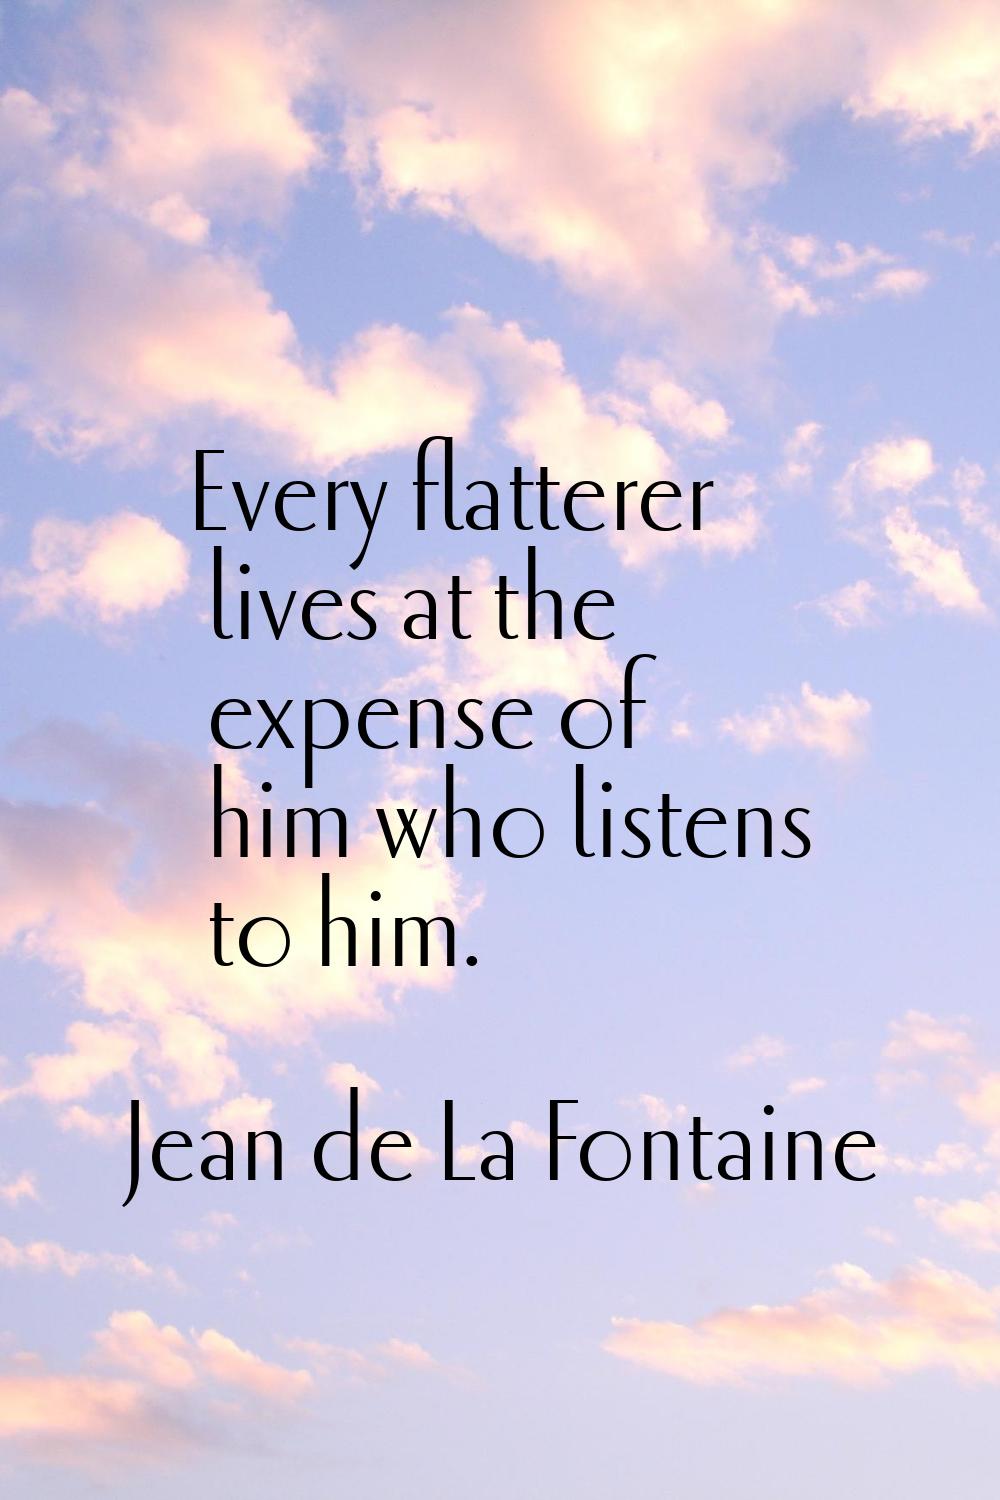 Every flatterer lives at the expense of him who listens to him.